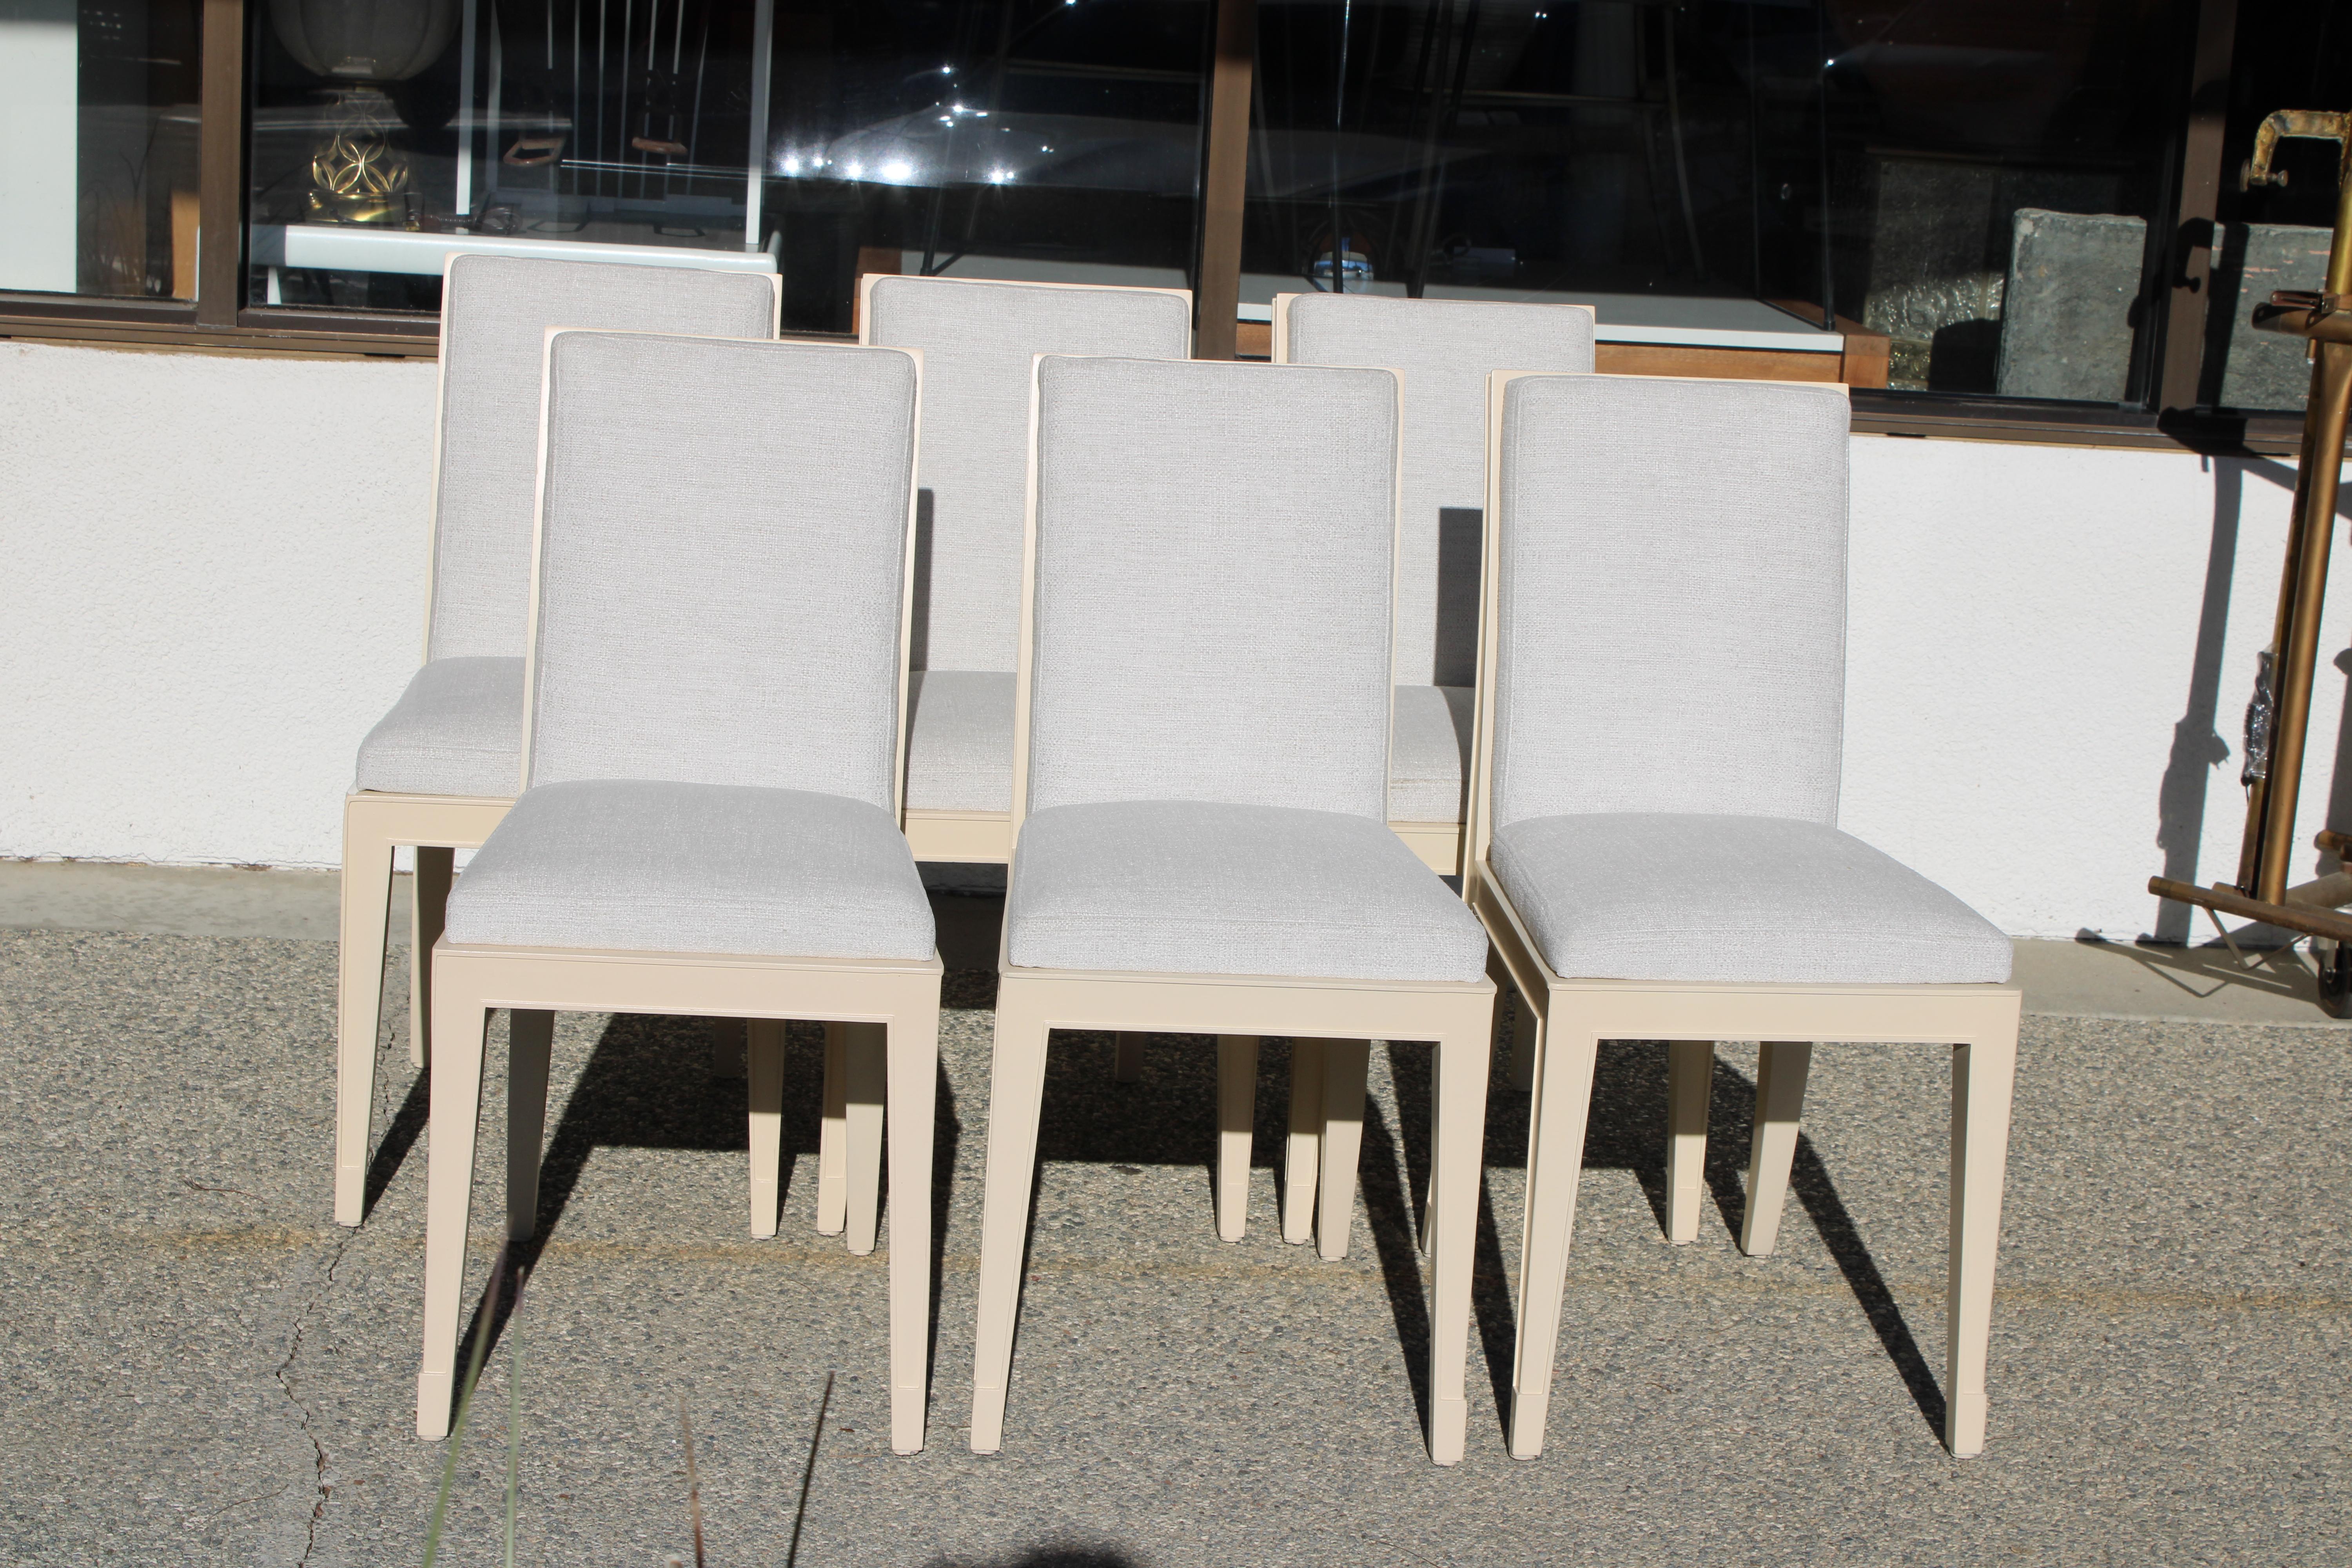 Six petite dining chairs designed by Philippe Starck for the Clift Royal Sonesta Hotel, San Francisco, CA., circa 2000.  Chairs have been professionally refinished and reupholstered. Chairs measures 15.5